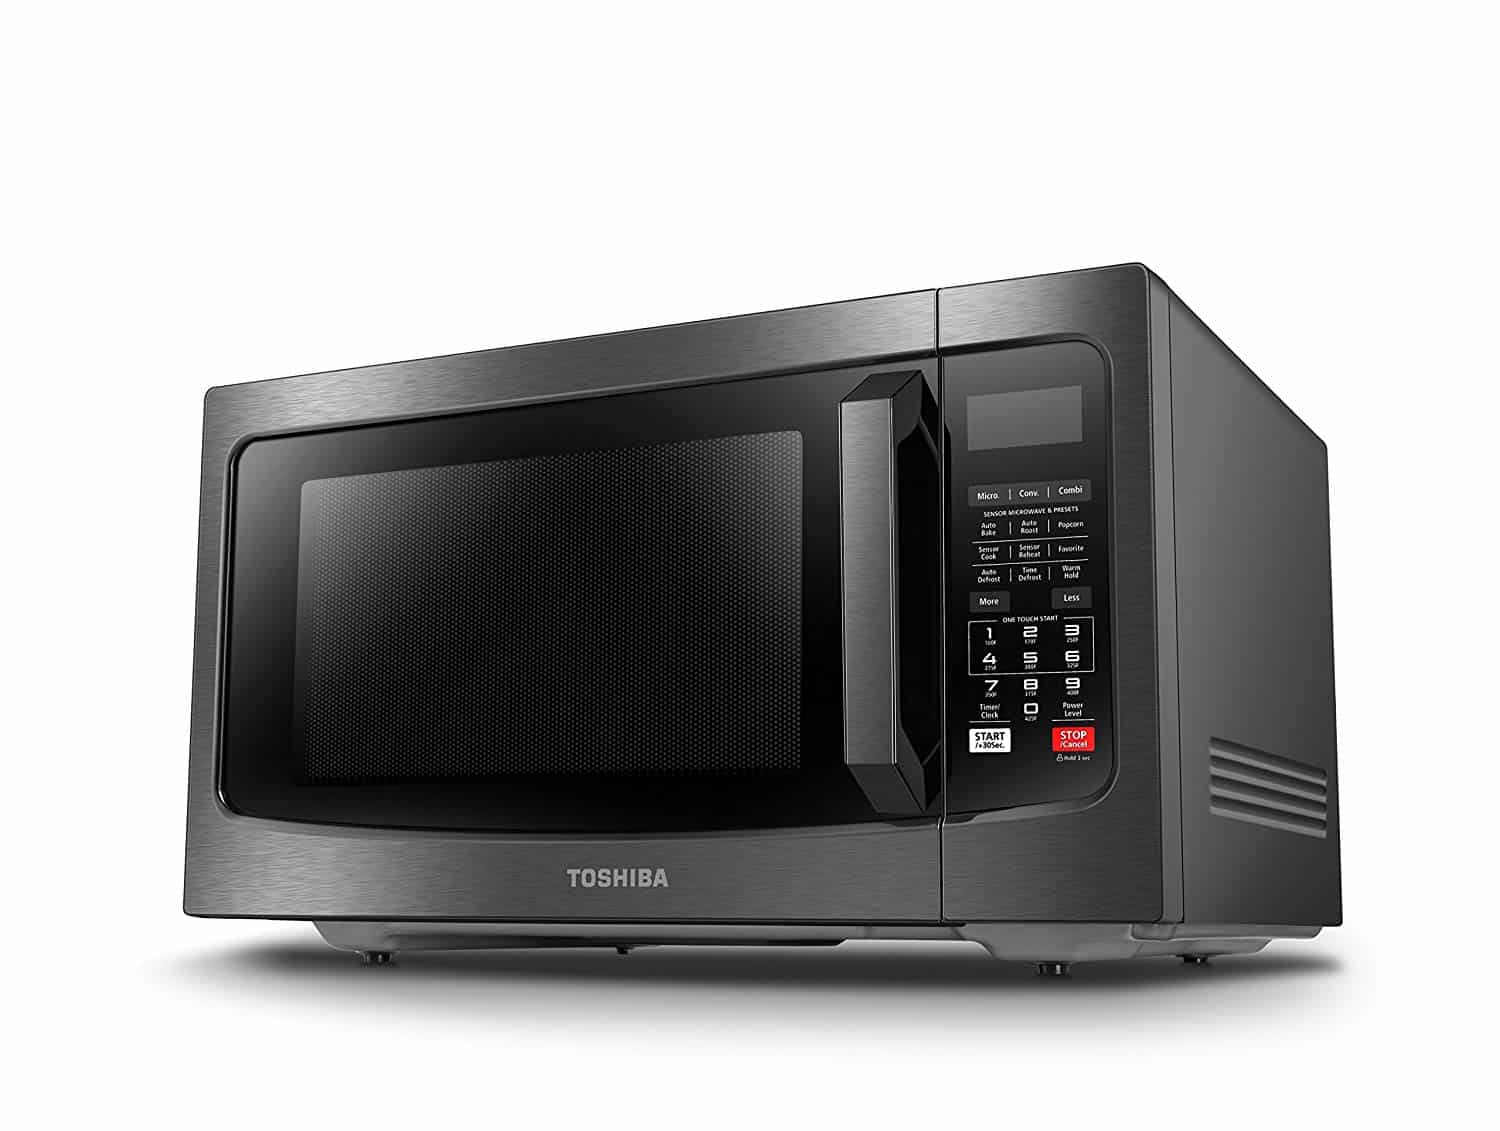 Top 10 Best Convection Microwaves In 2020 Reviews Buying Guide